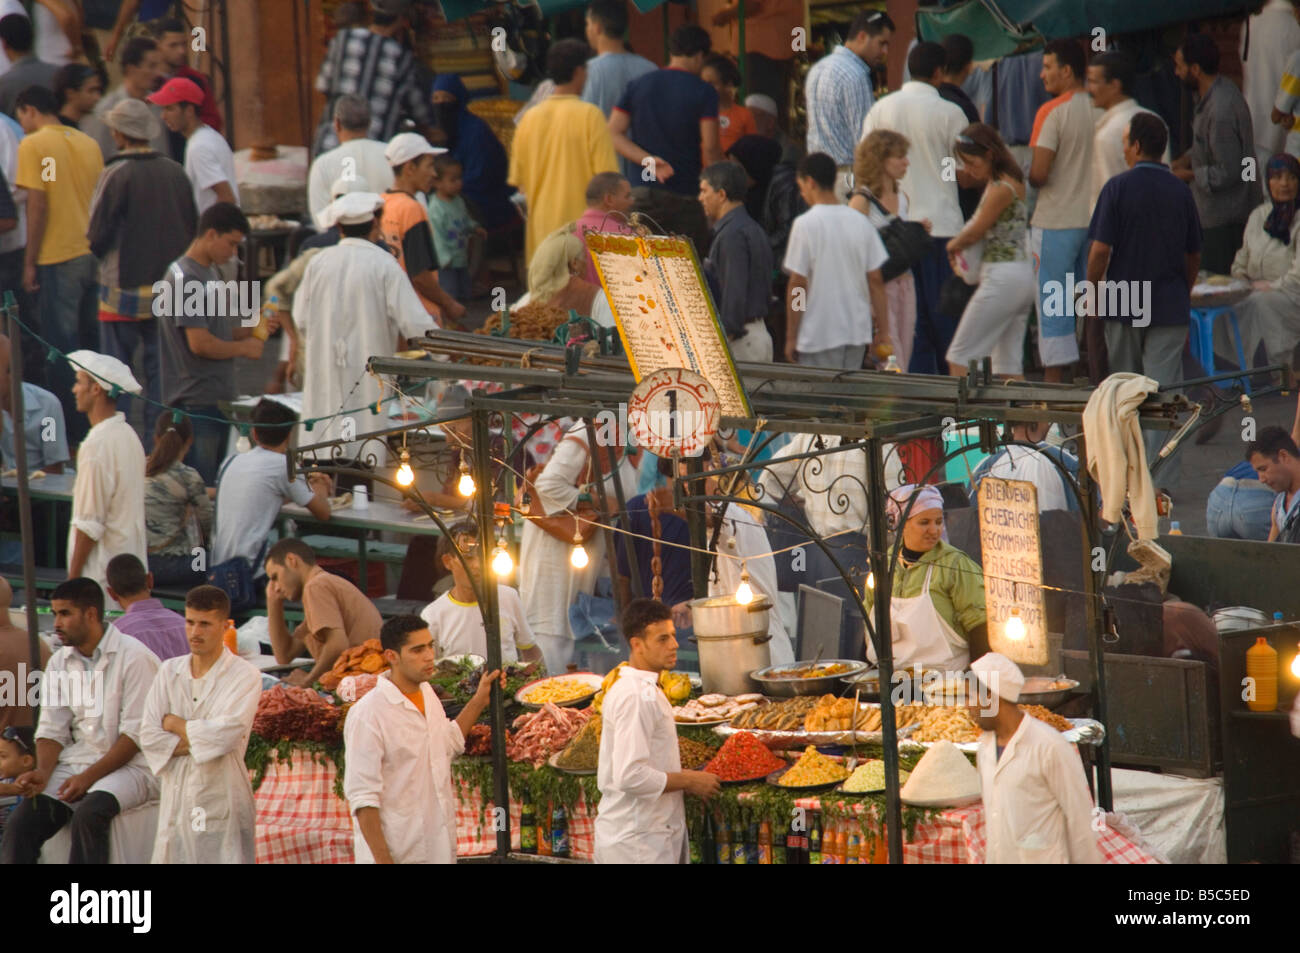 A compressed perspective aerial view of the open air 'restaurants' at the Djemaa El Fna in Marrakesh. Stock Photo